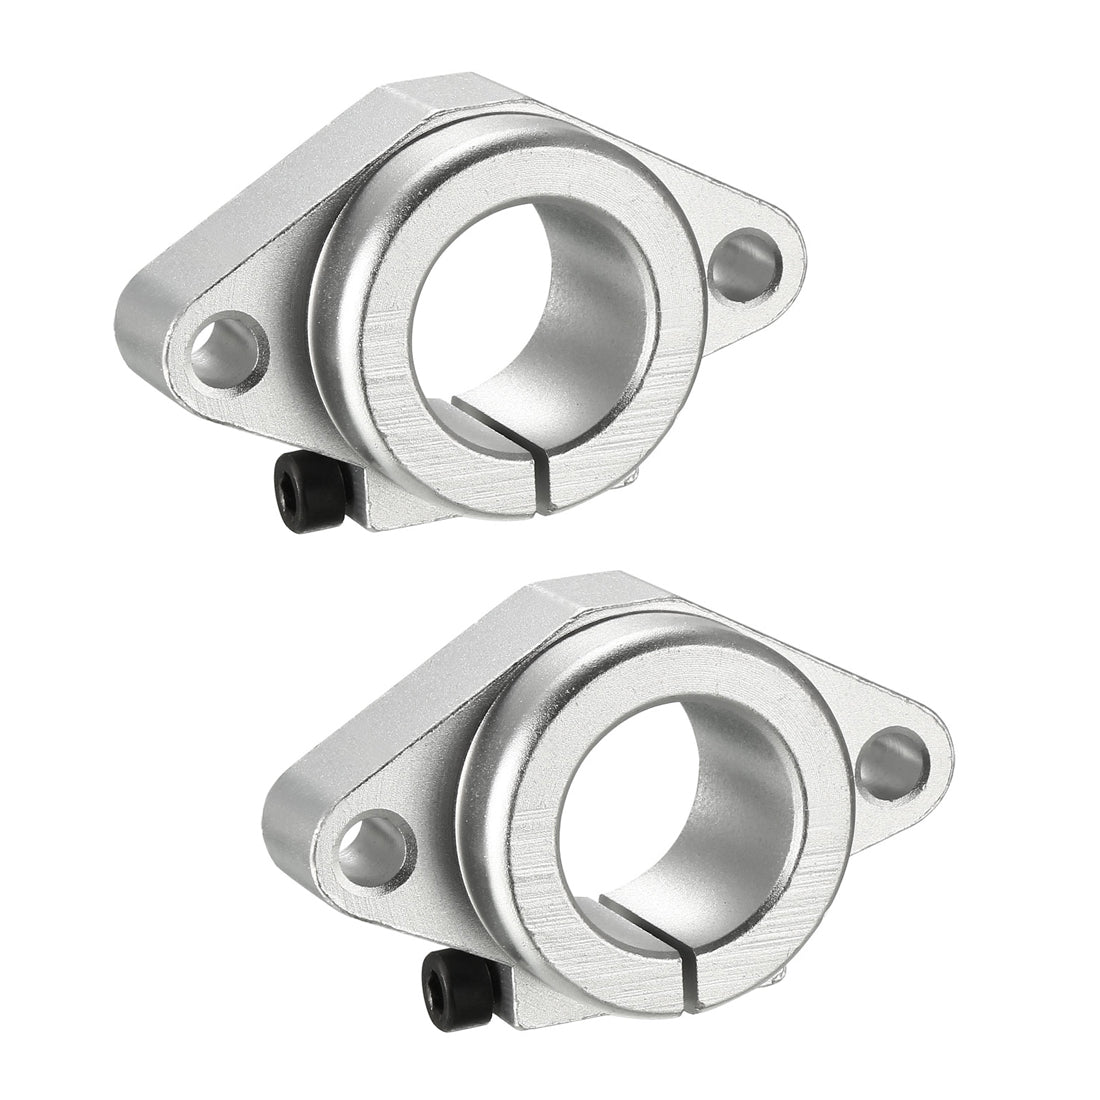 uxcell Uxcell 2PCS SHF25 Aluminum Linear Motion Rail Clamping Rod Rail Guide Support for 25mm Diameter Shaft